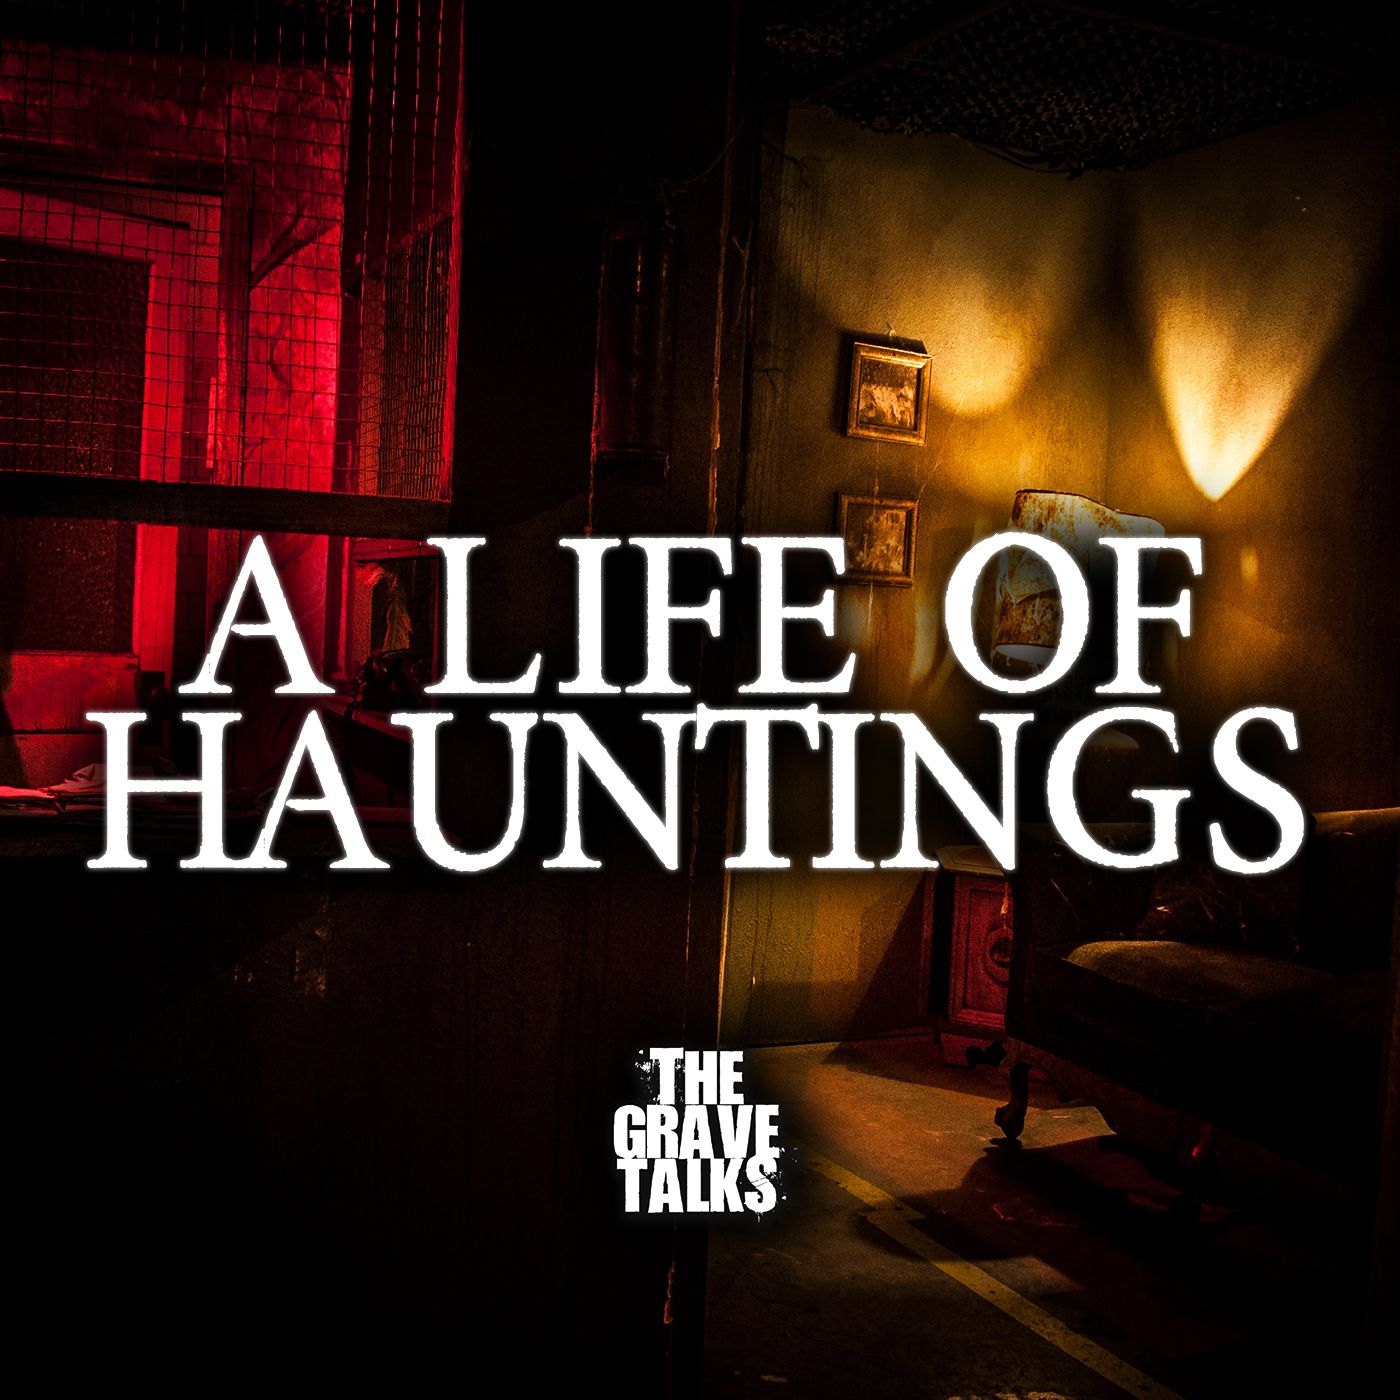 A Life of Hauntings | A Conversation With Beth Darlington